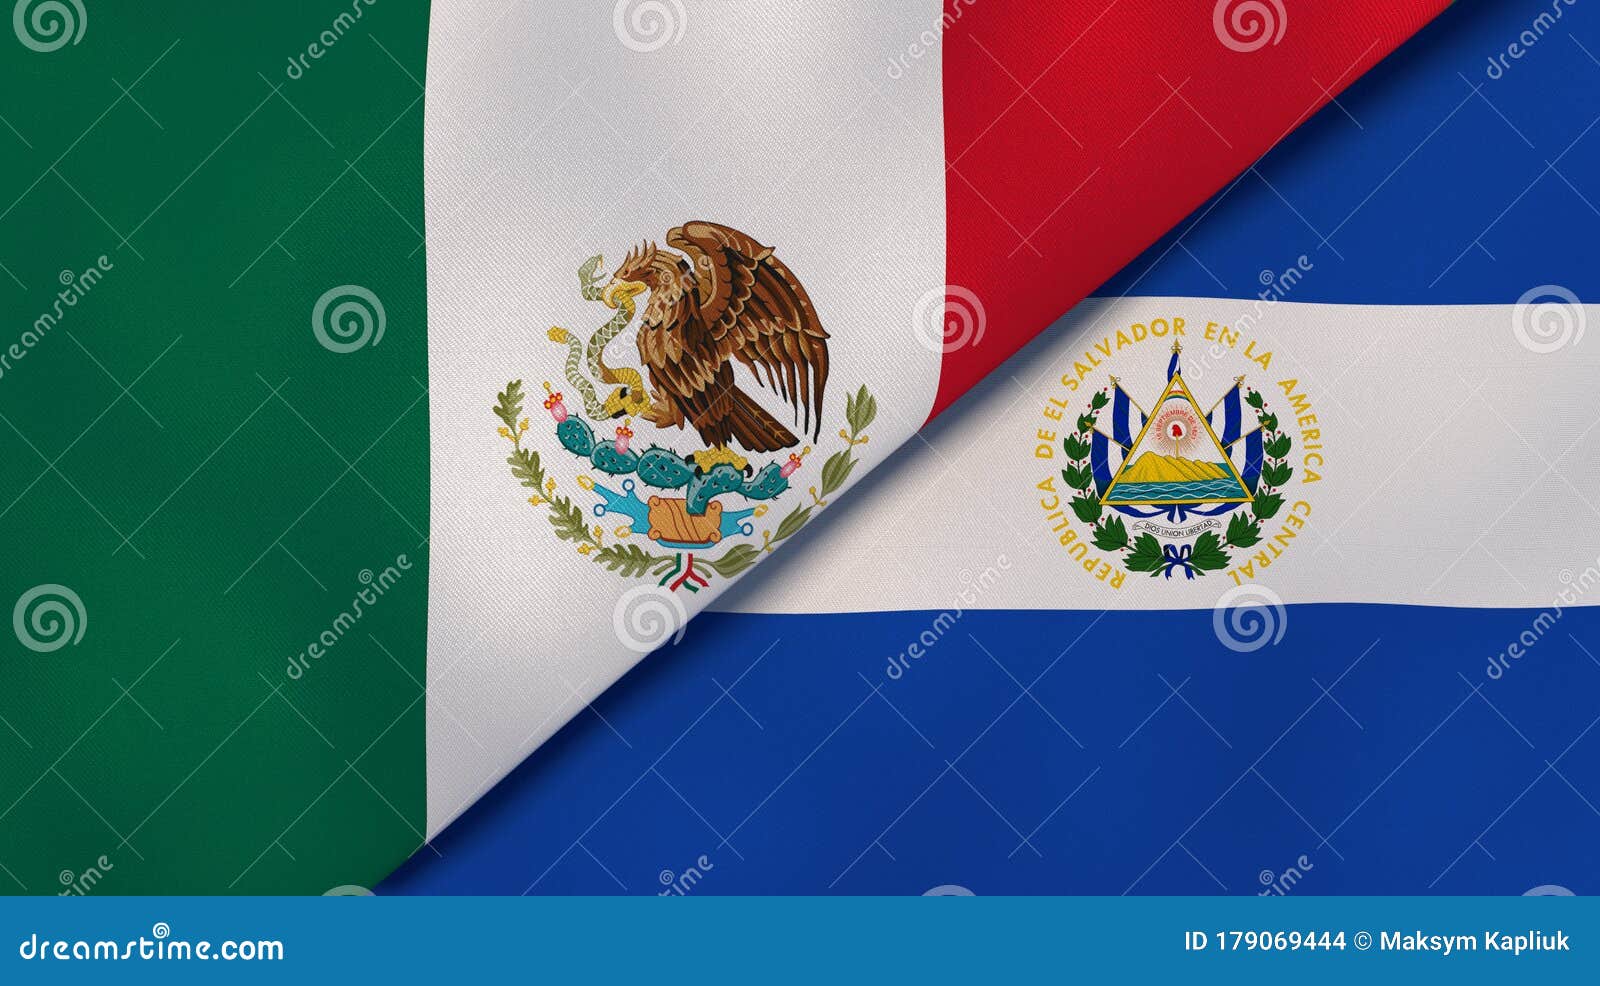 the flags of mexico and el salvador. news, reportage, business background. 3d 